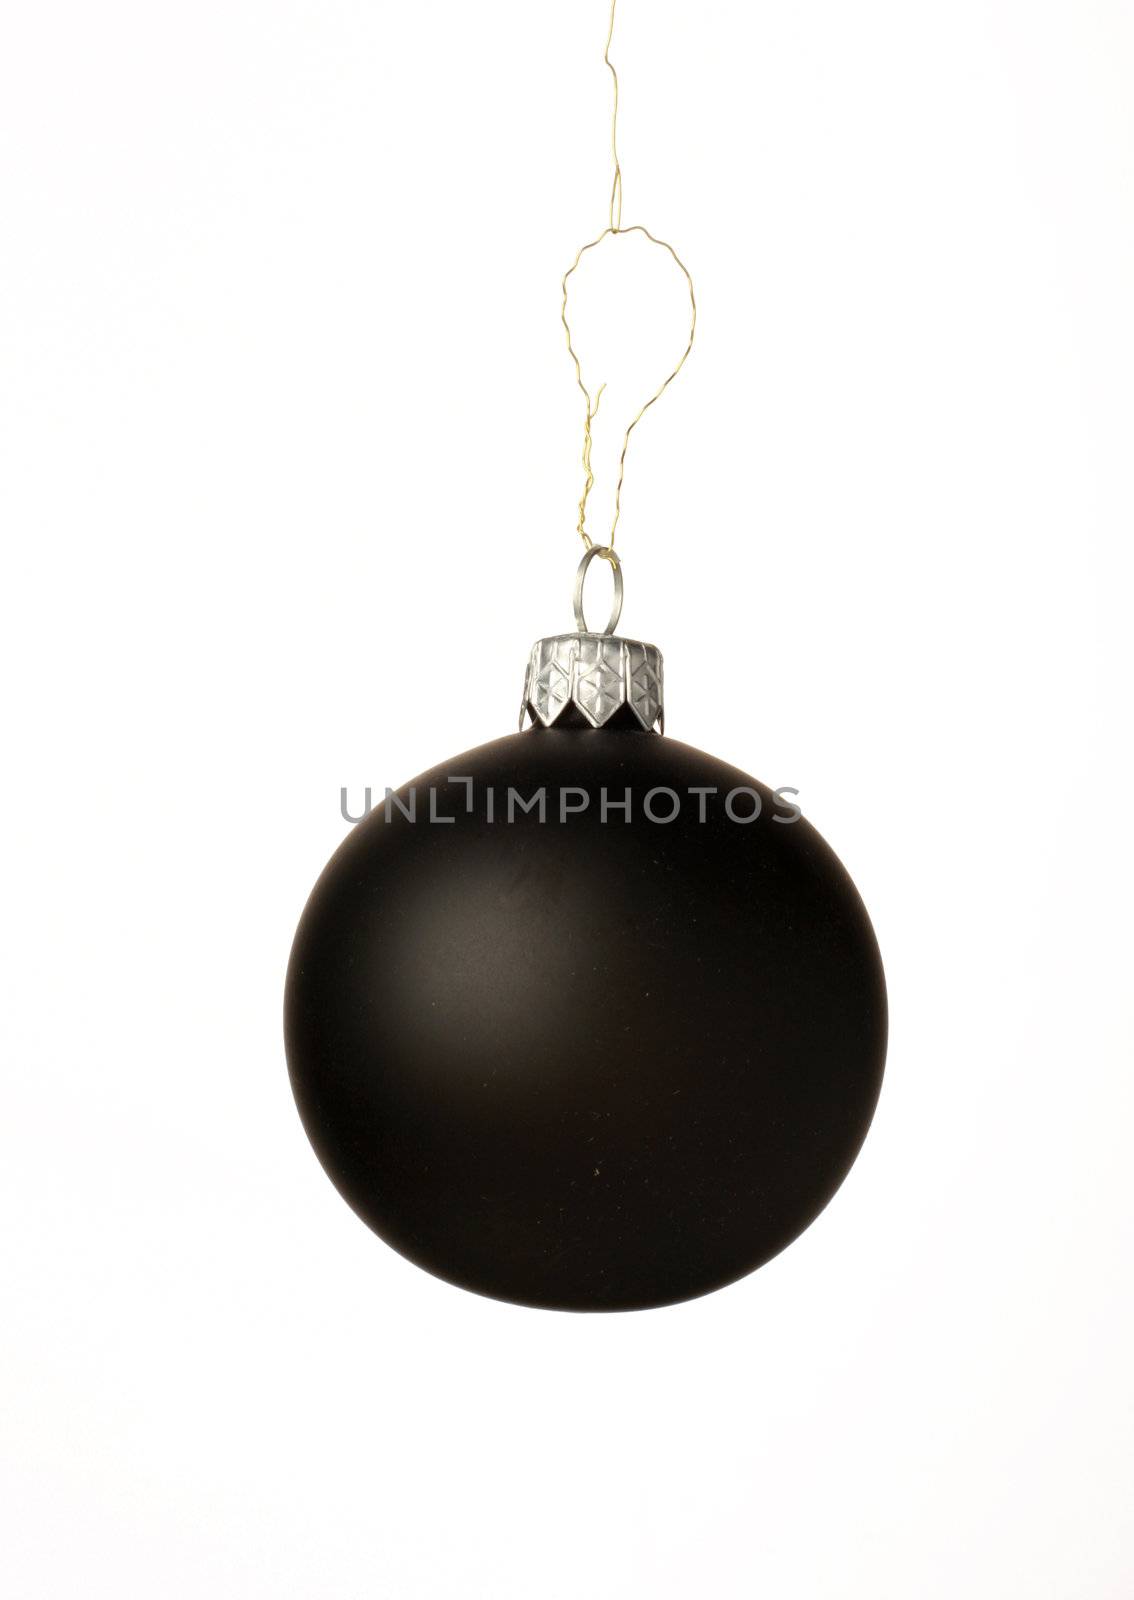 A black christmas ball hanging from golden thread, shot in studio isolated on white. Perfect for your holiday designs or ads